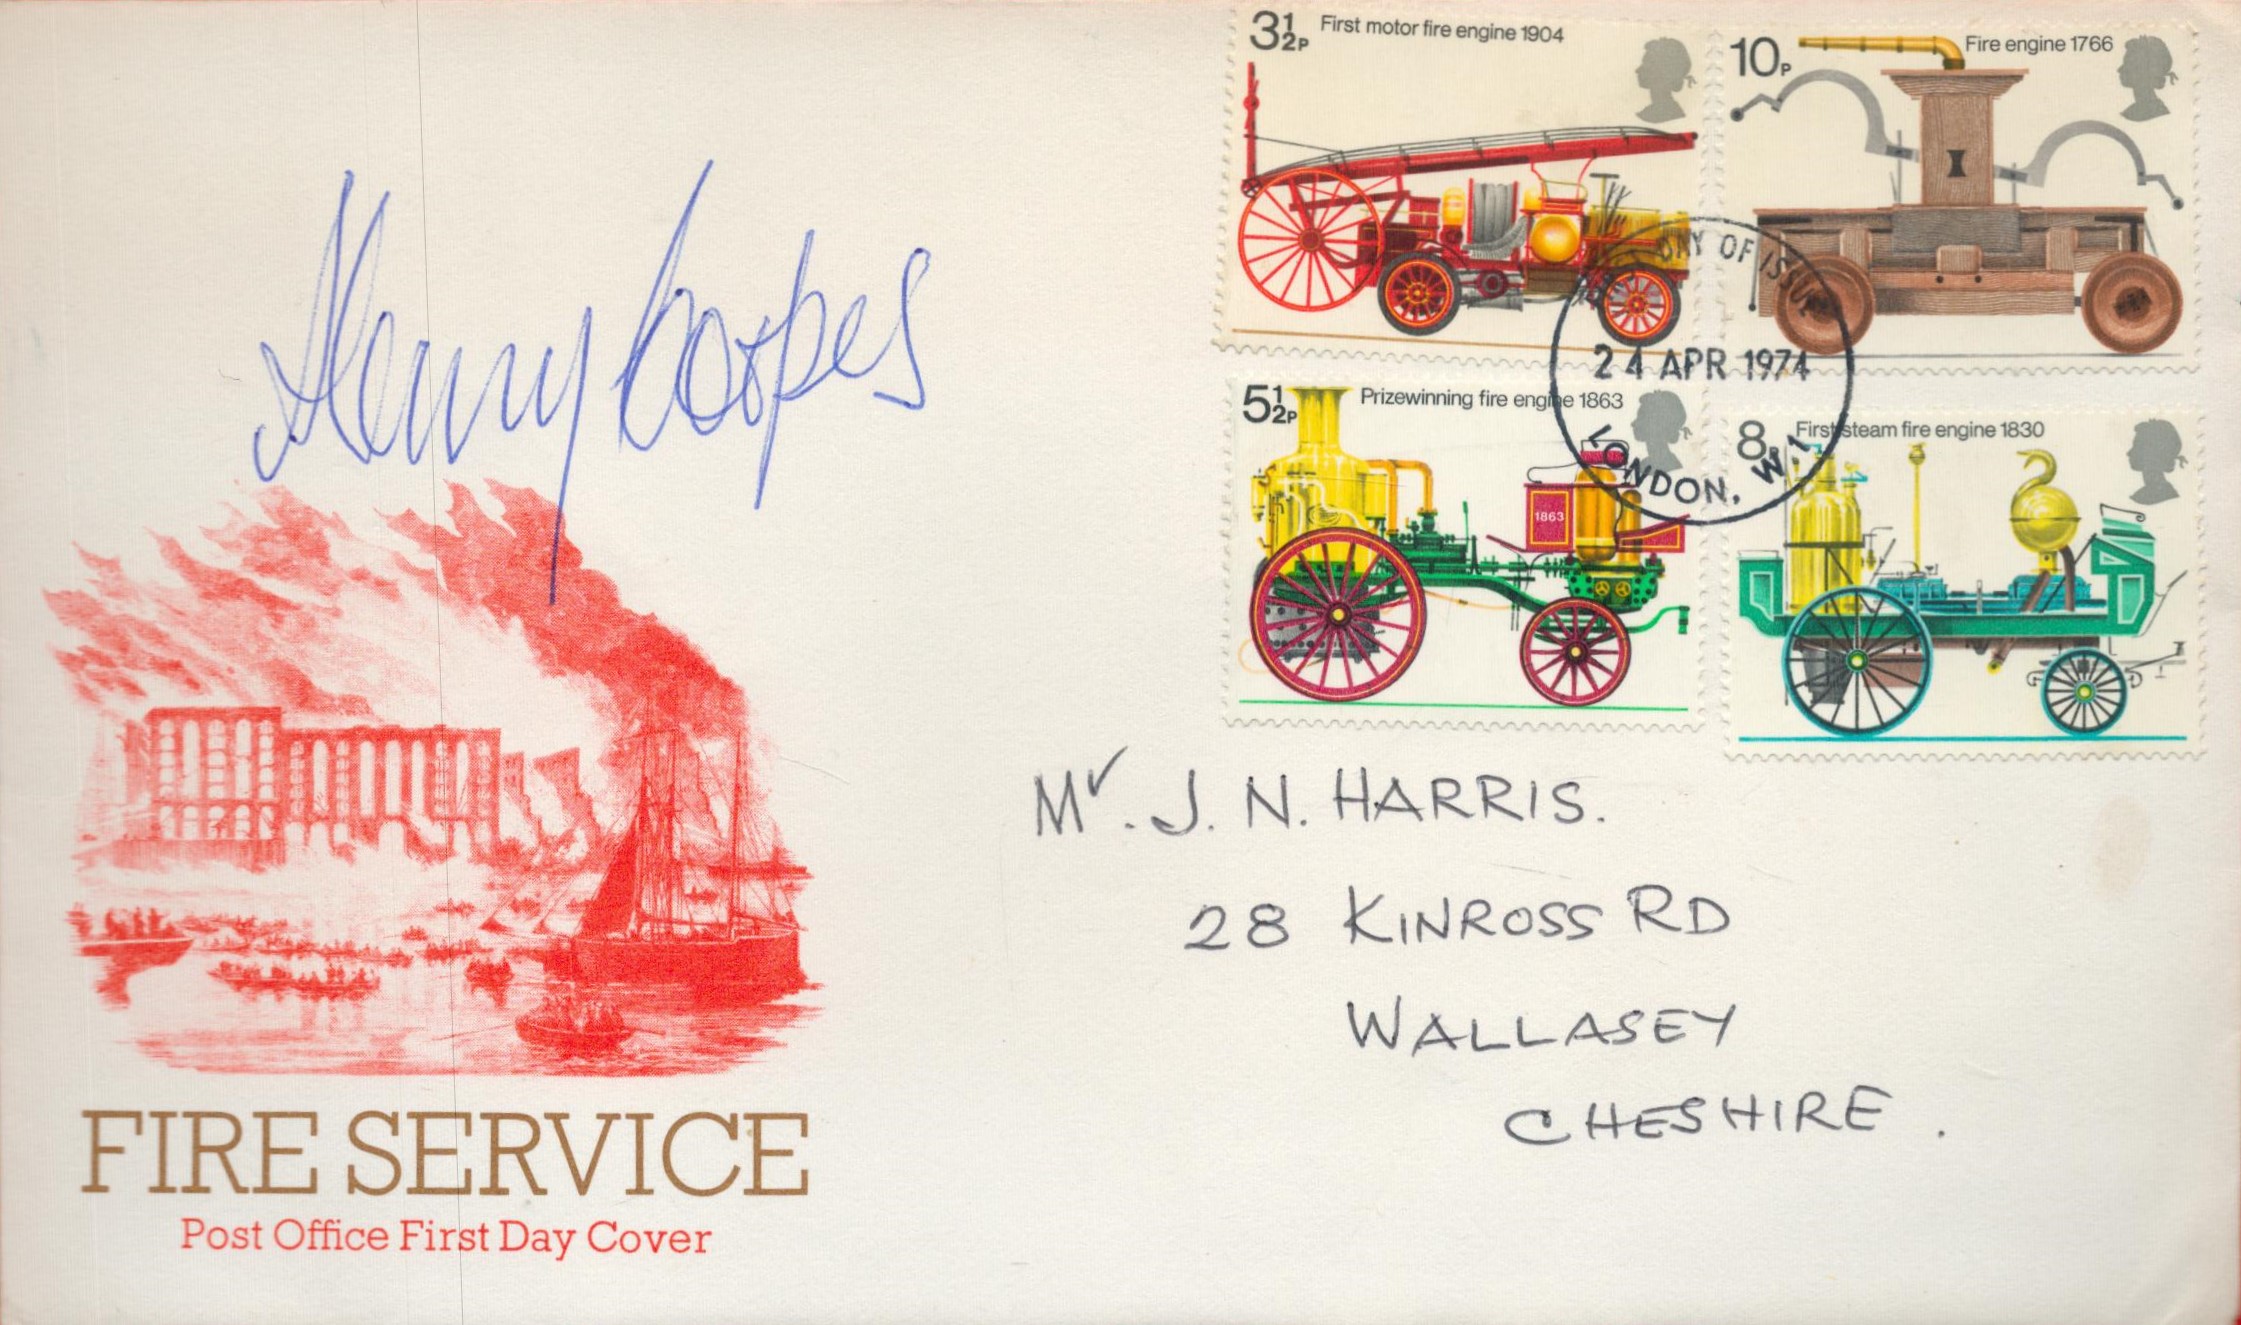 Henry Cooper Signed Fire Service Royal Mail First Day Cover. 4 British stamps with 24 apr 1974 First